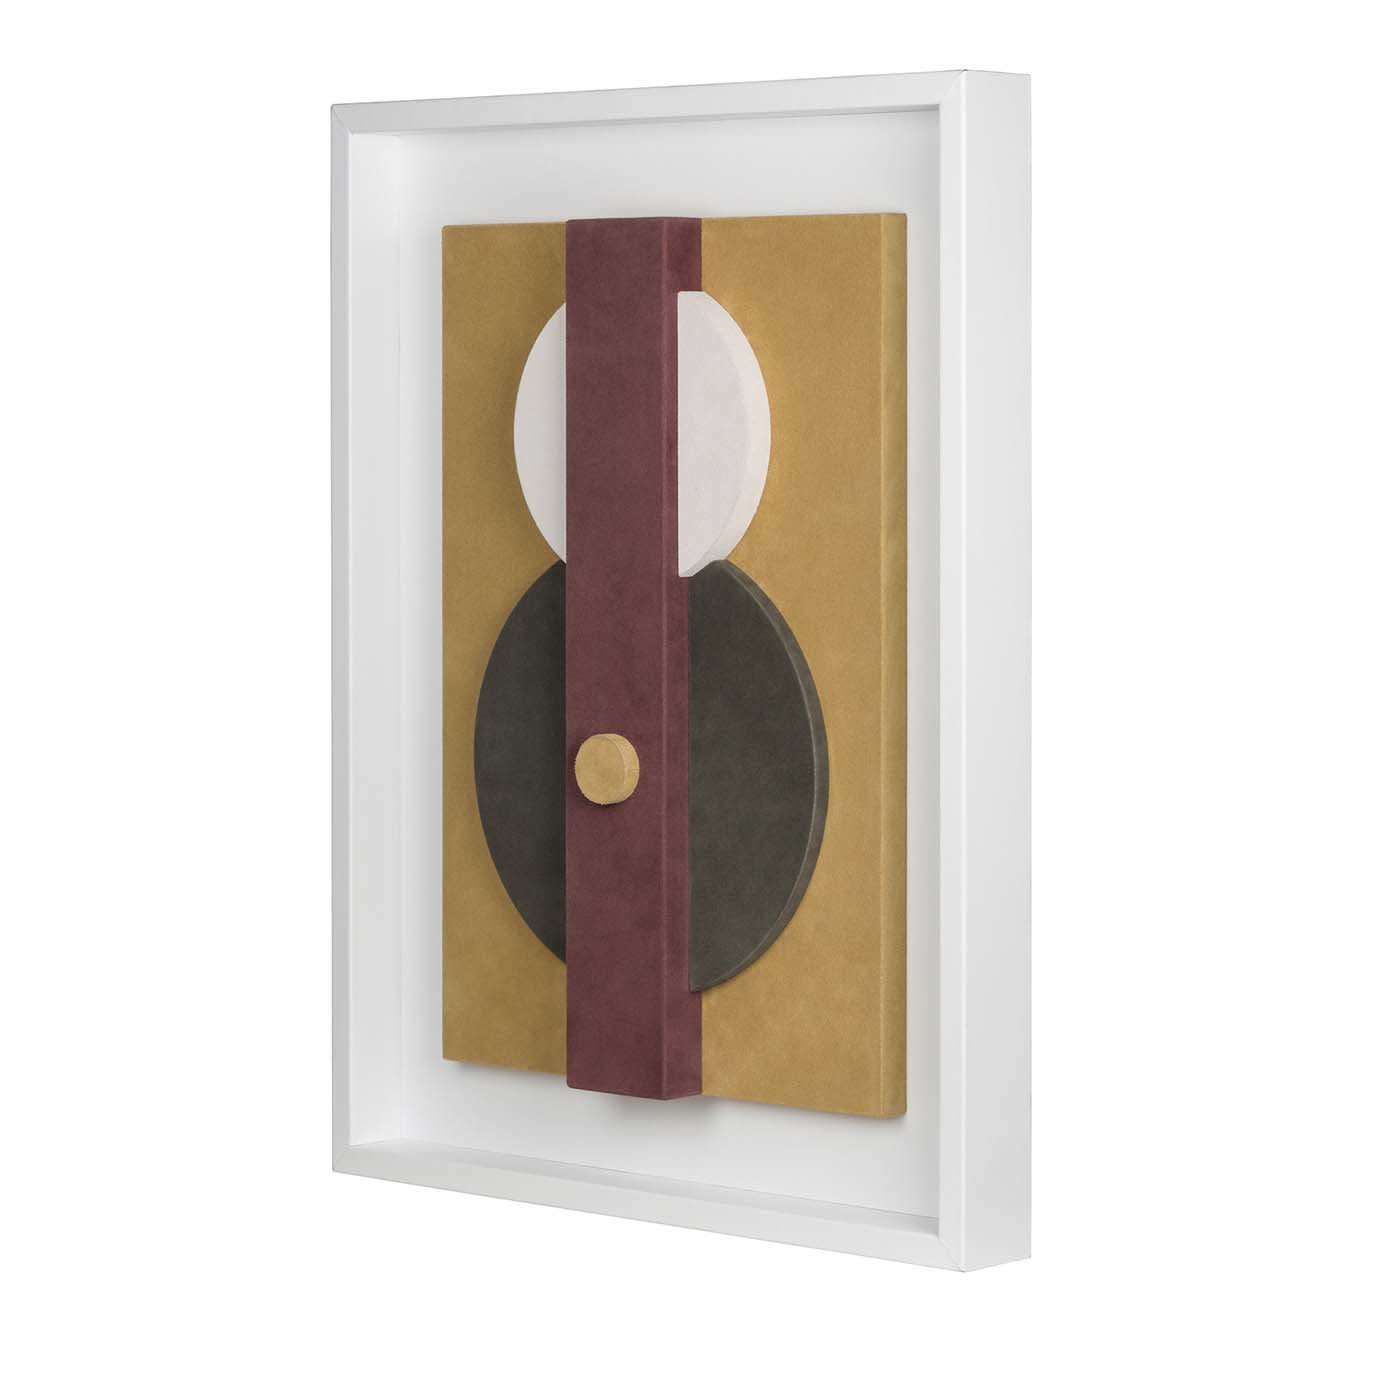 Tabou Decorative Wall Sculpture with White Frame #1 - Giobagnara